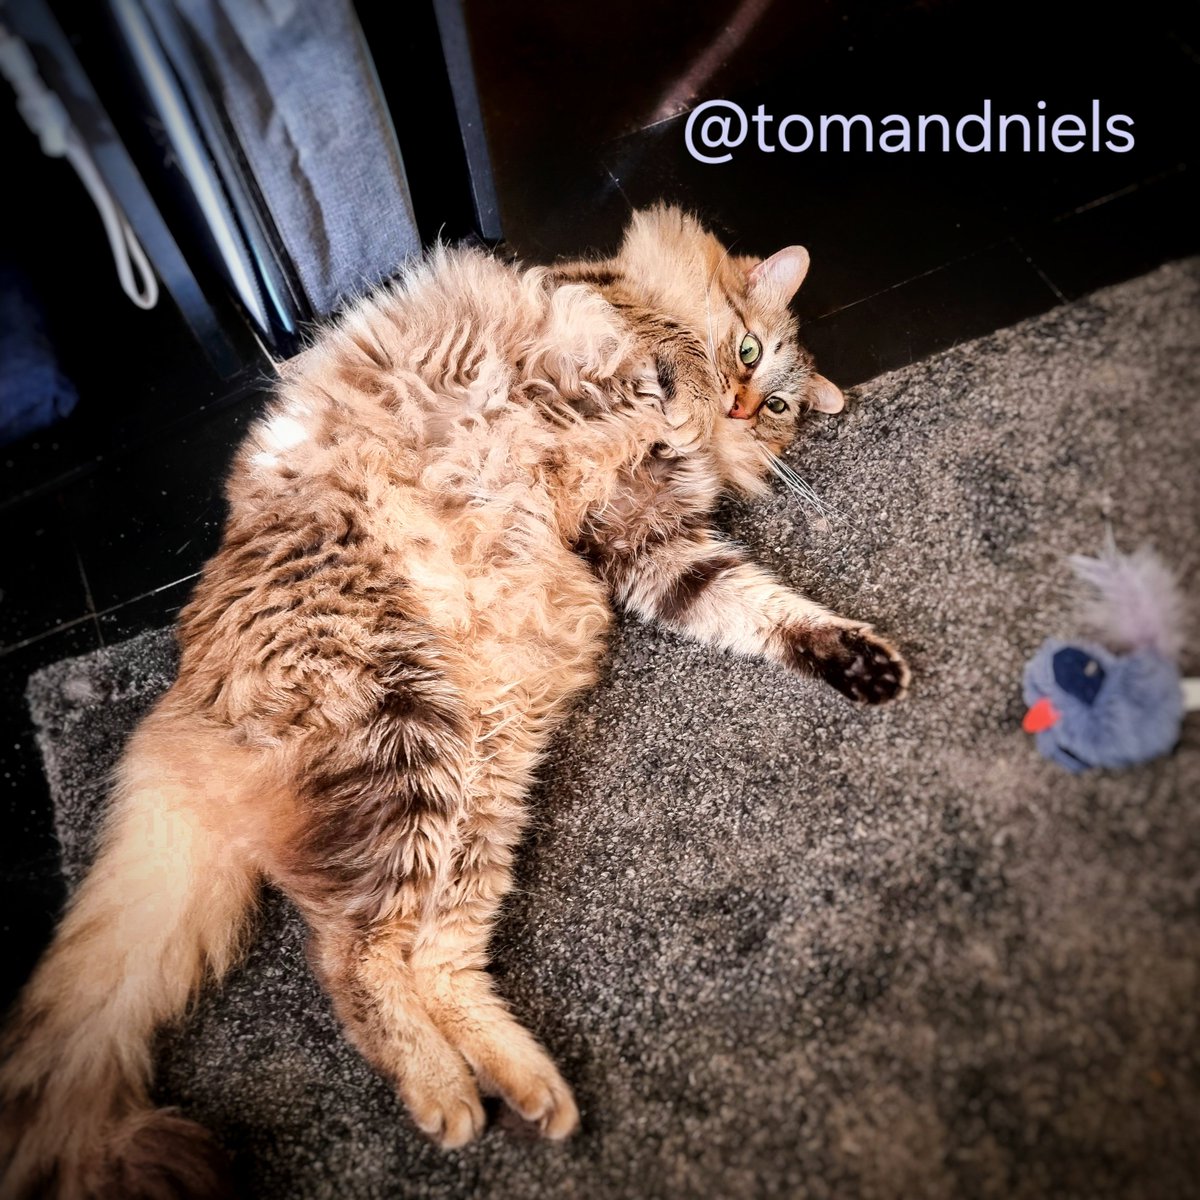 The Hooman is late again!
This was supposed to be for #JellyBellyFriday!
Instead, it's now #Caturday!

How do you all train your staff?
- Niels
#CatsOfTwitter